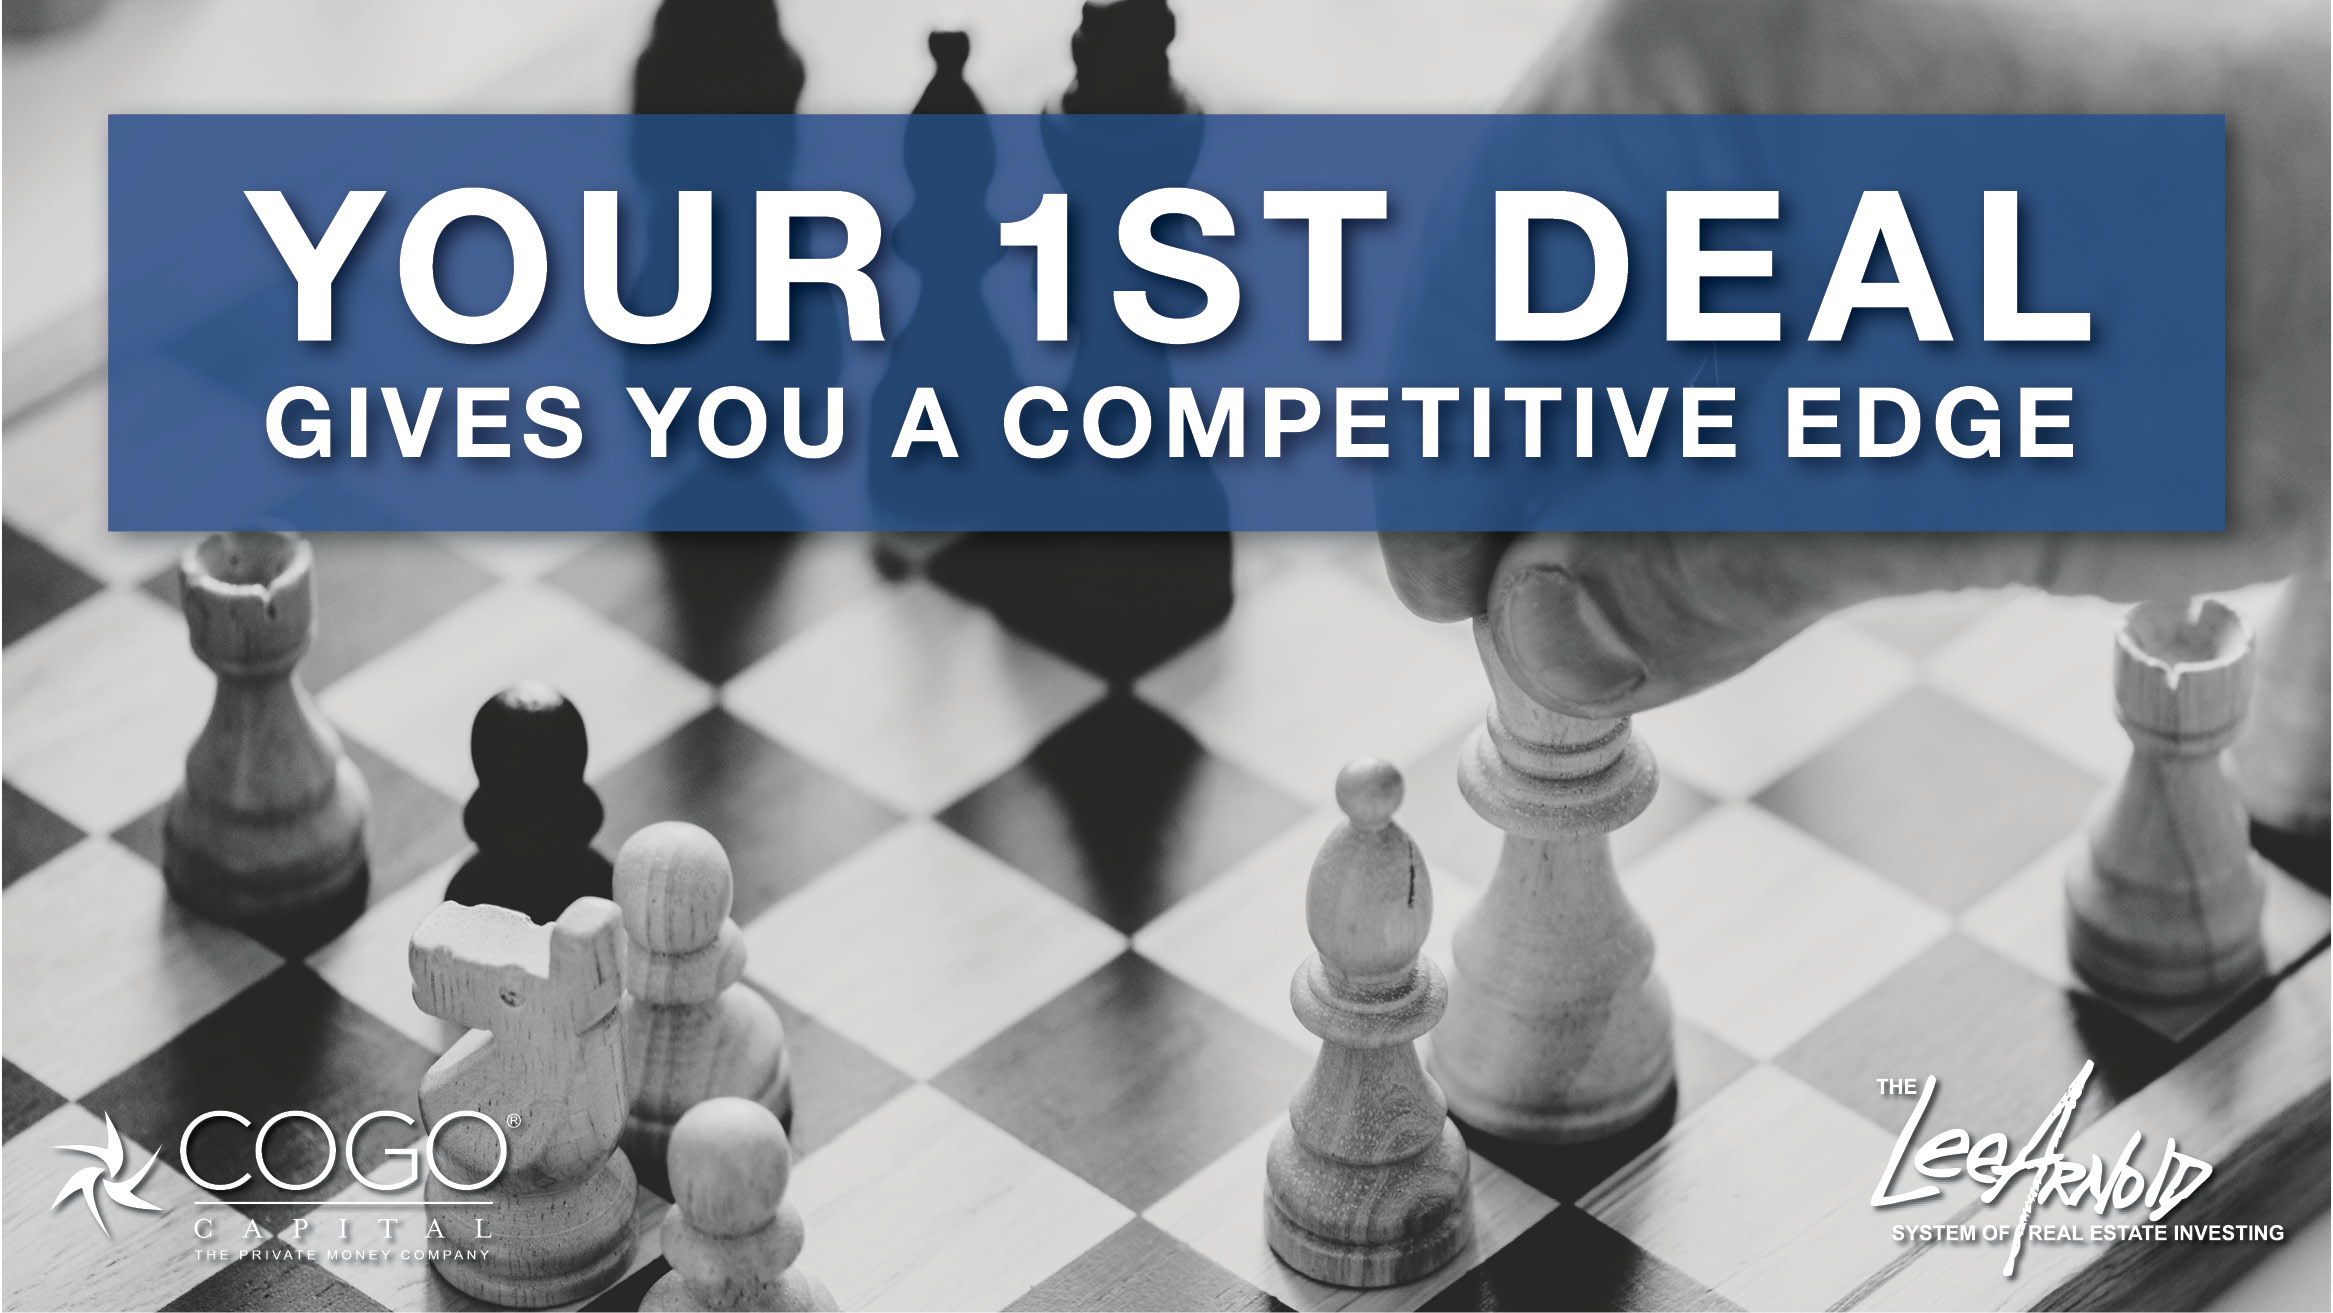 Your 1st Deal Gives You a Competitive Edge